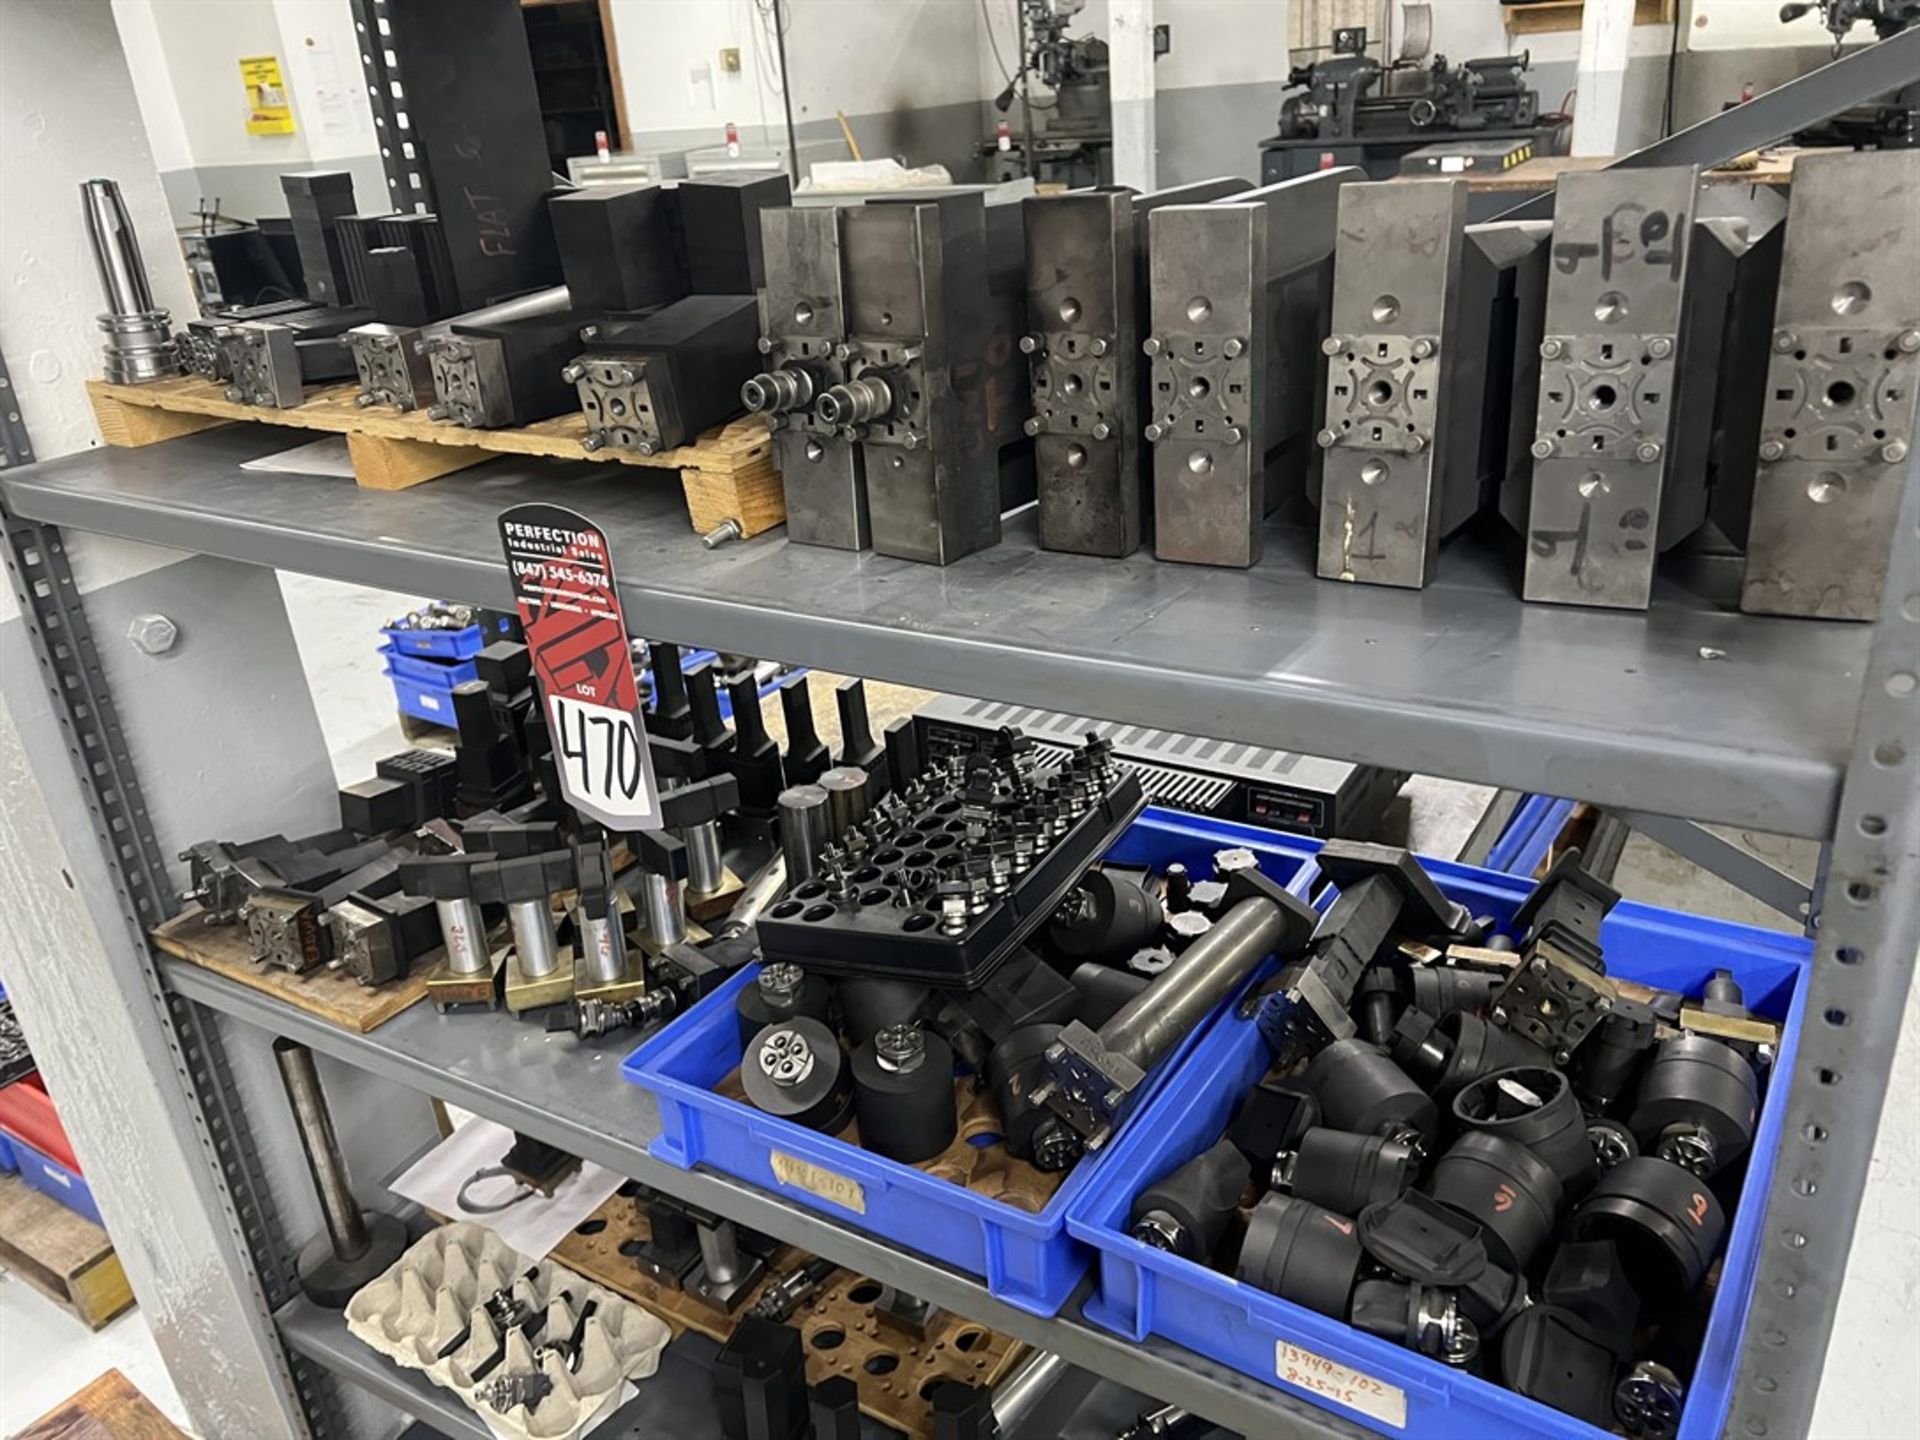 Rack of Assorted EROWA EDM Tooling, Fixtures and Electrodes - Image 2 of 4